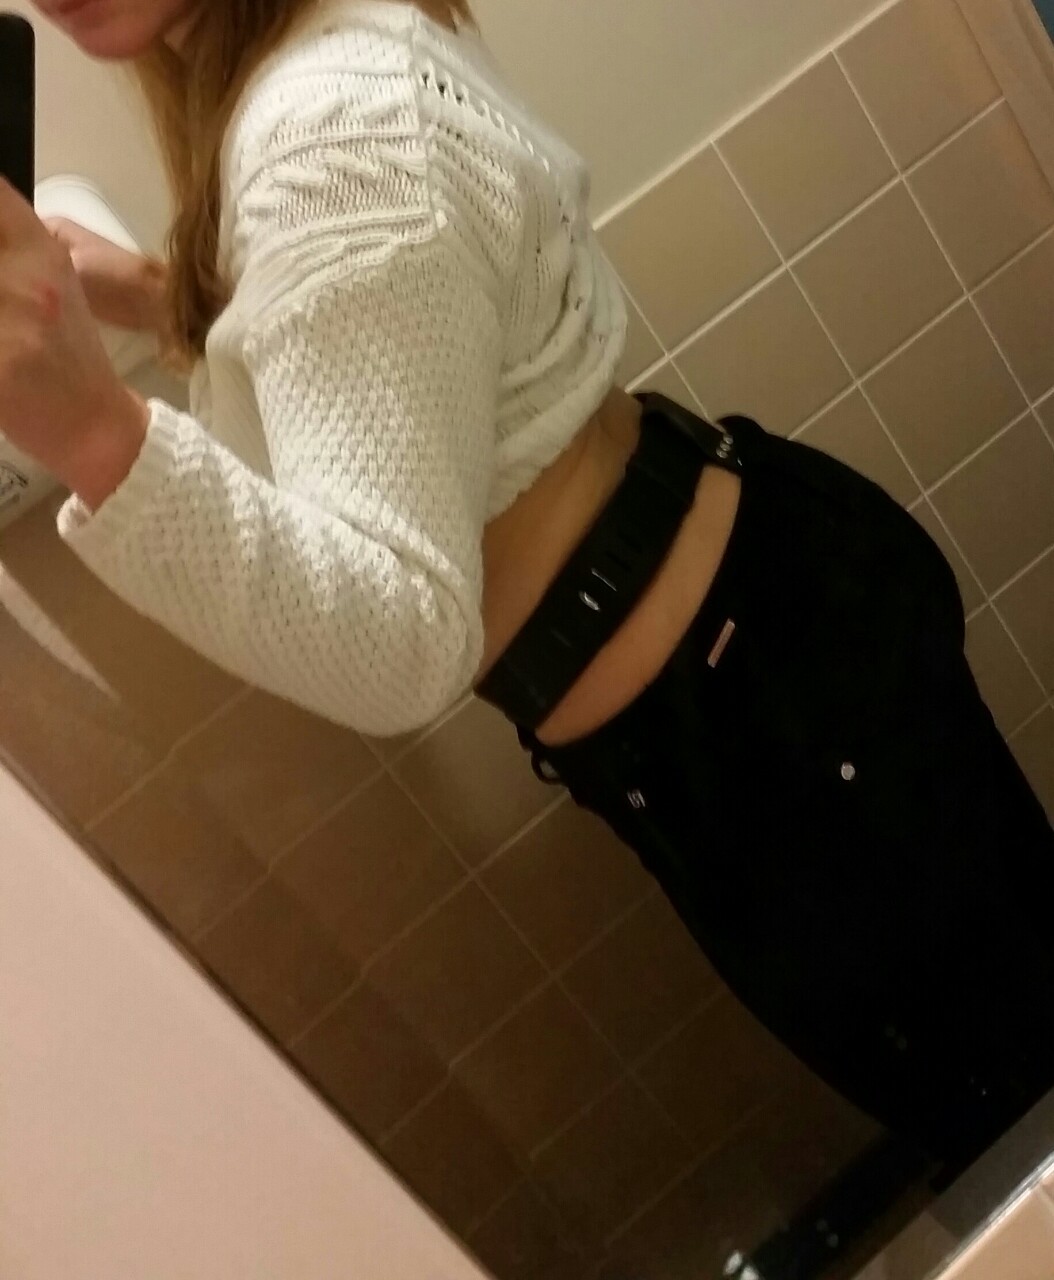 pickmeup-sortmeout-calmmedown:  Made to wear my plug and chastity belt to work today….